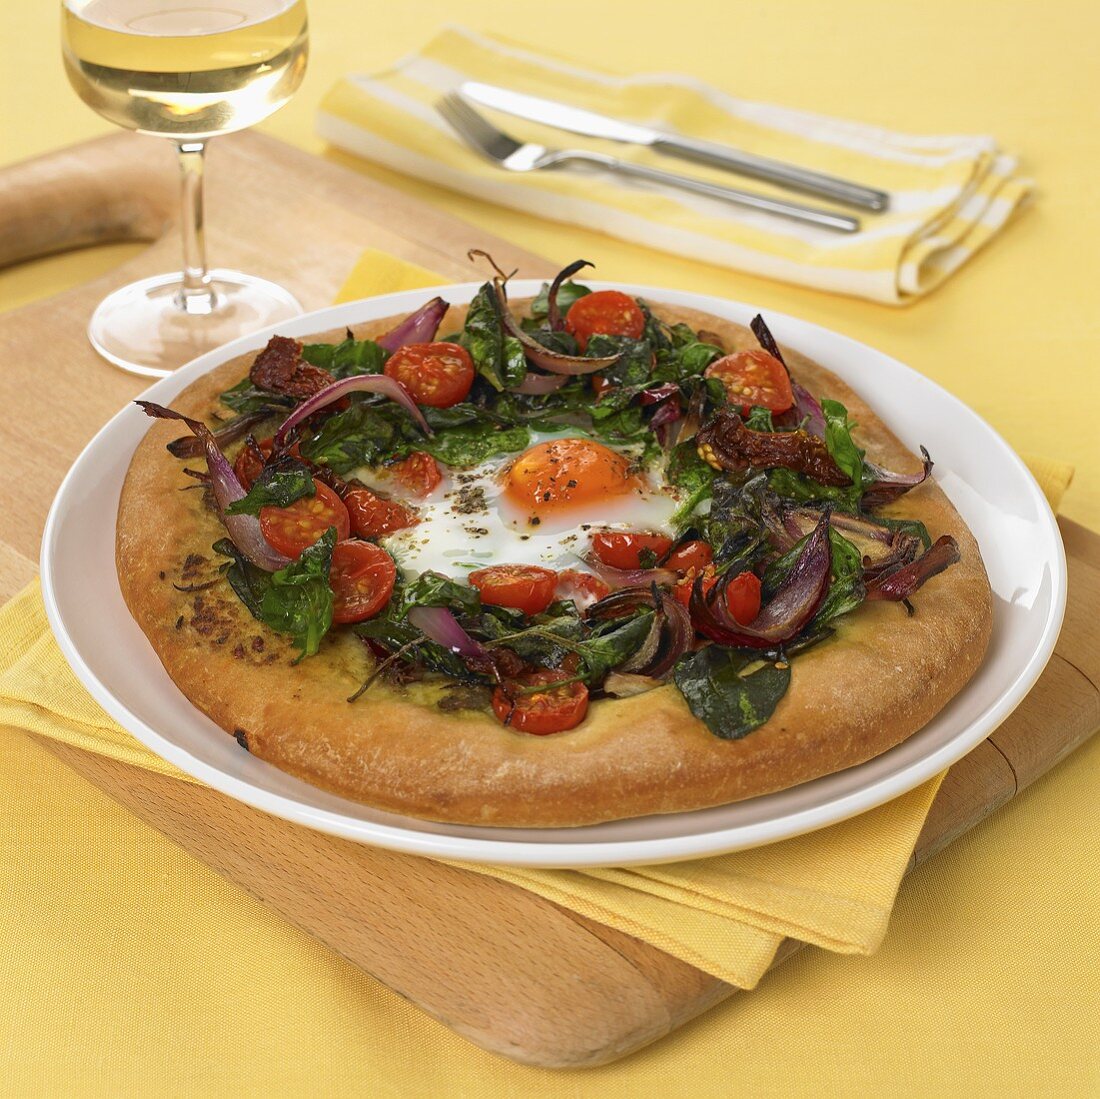 Pizza topped with fried egg, spinach, cherry tomatoes and onions